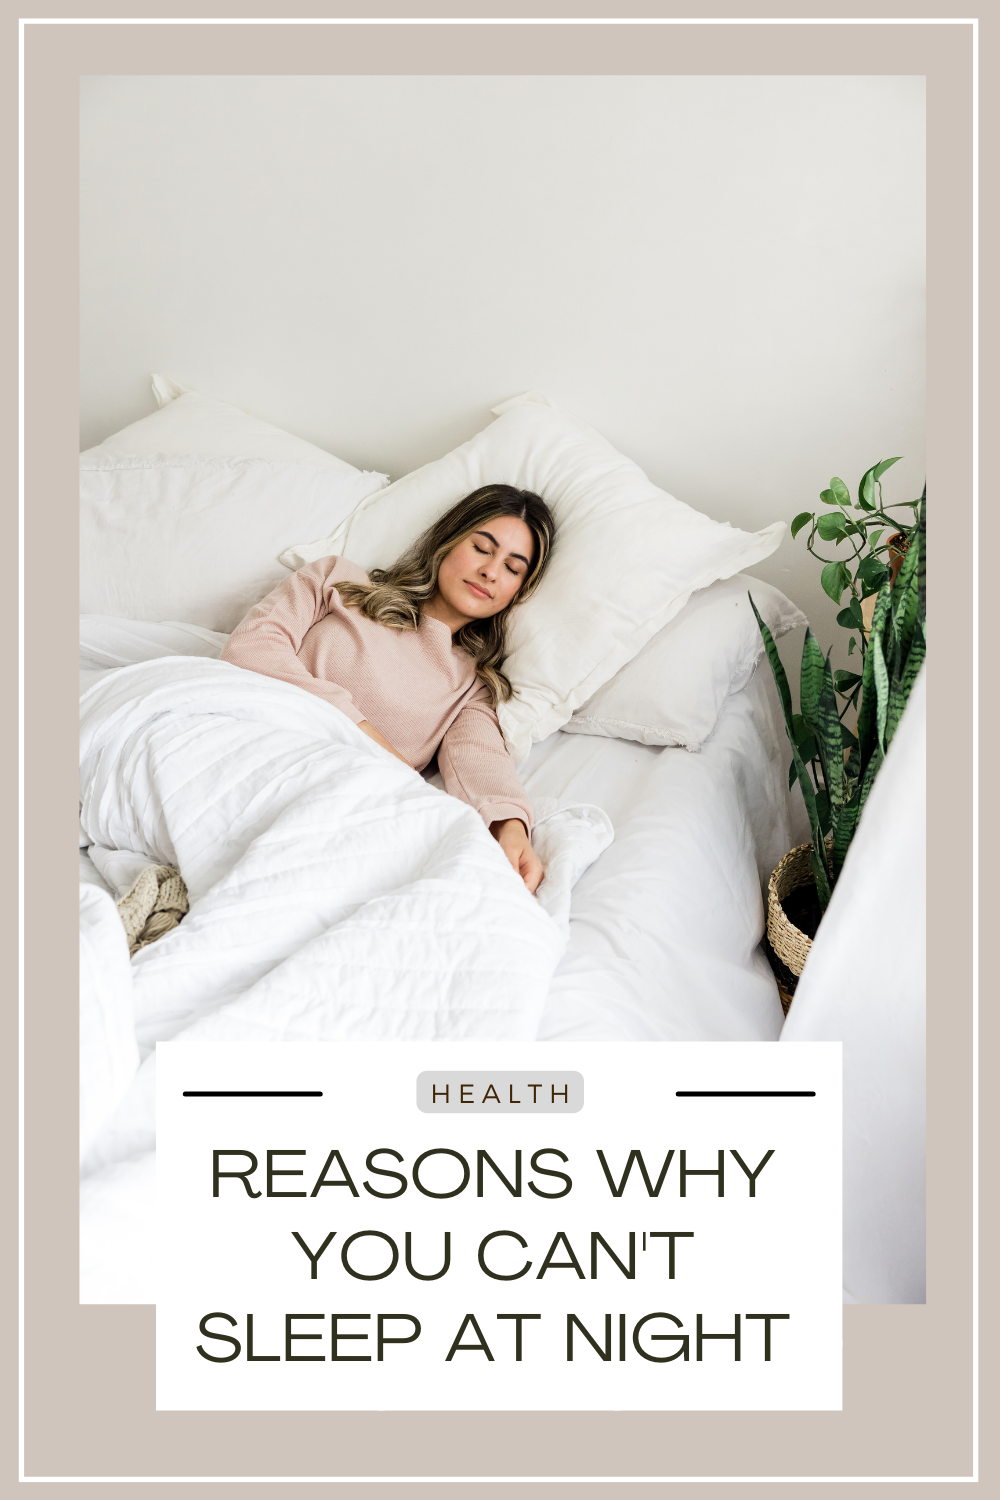 Here are Some of the Top Reasons why you Can’t Sleep at Night